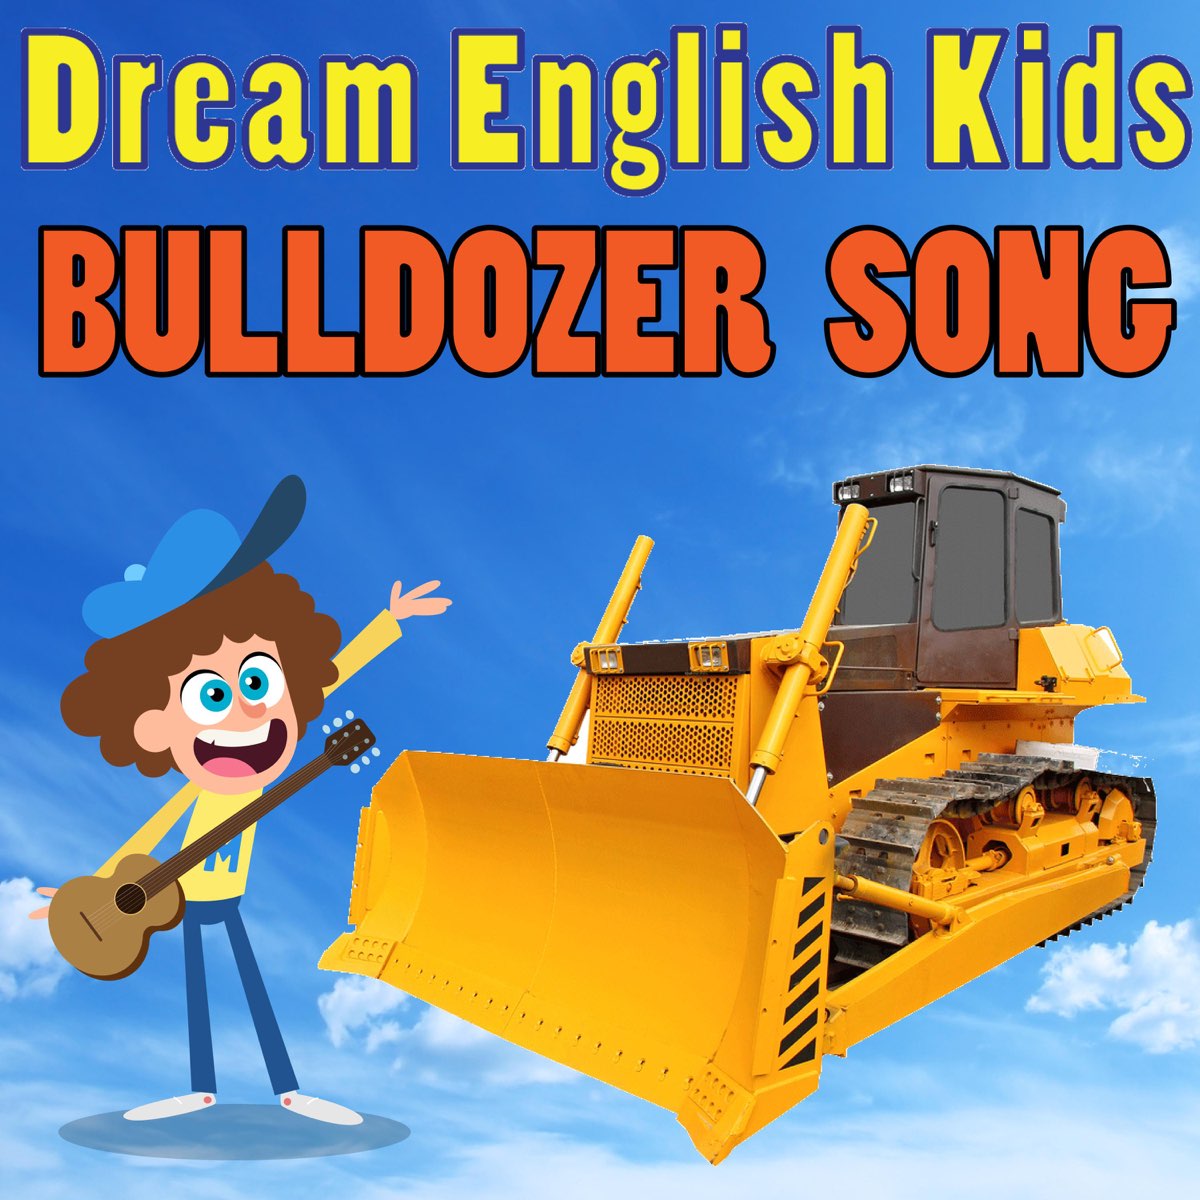 Bulldozer Song - Single by Dream English Kids on Apple Music